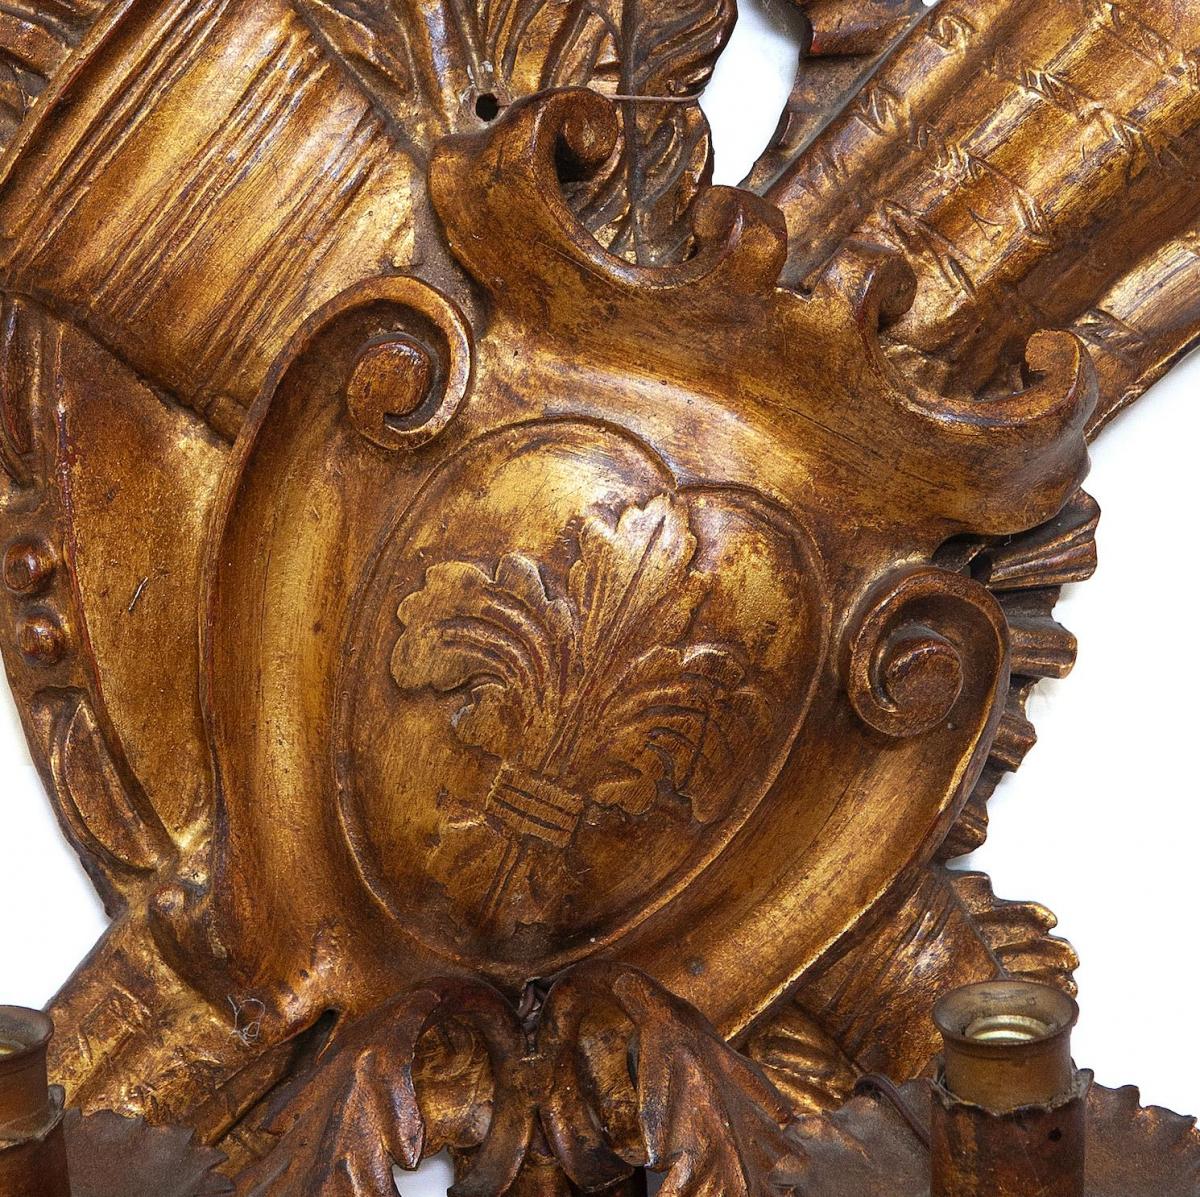 Wall Sconce Trophy Carved Gilded 19th Century Fleur-de-Lys Shield Quivers Herald